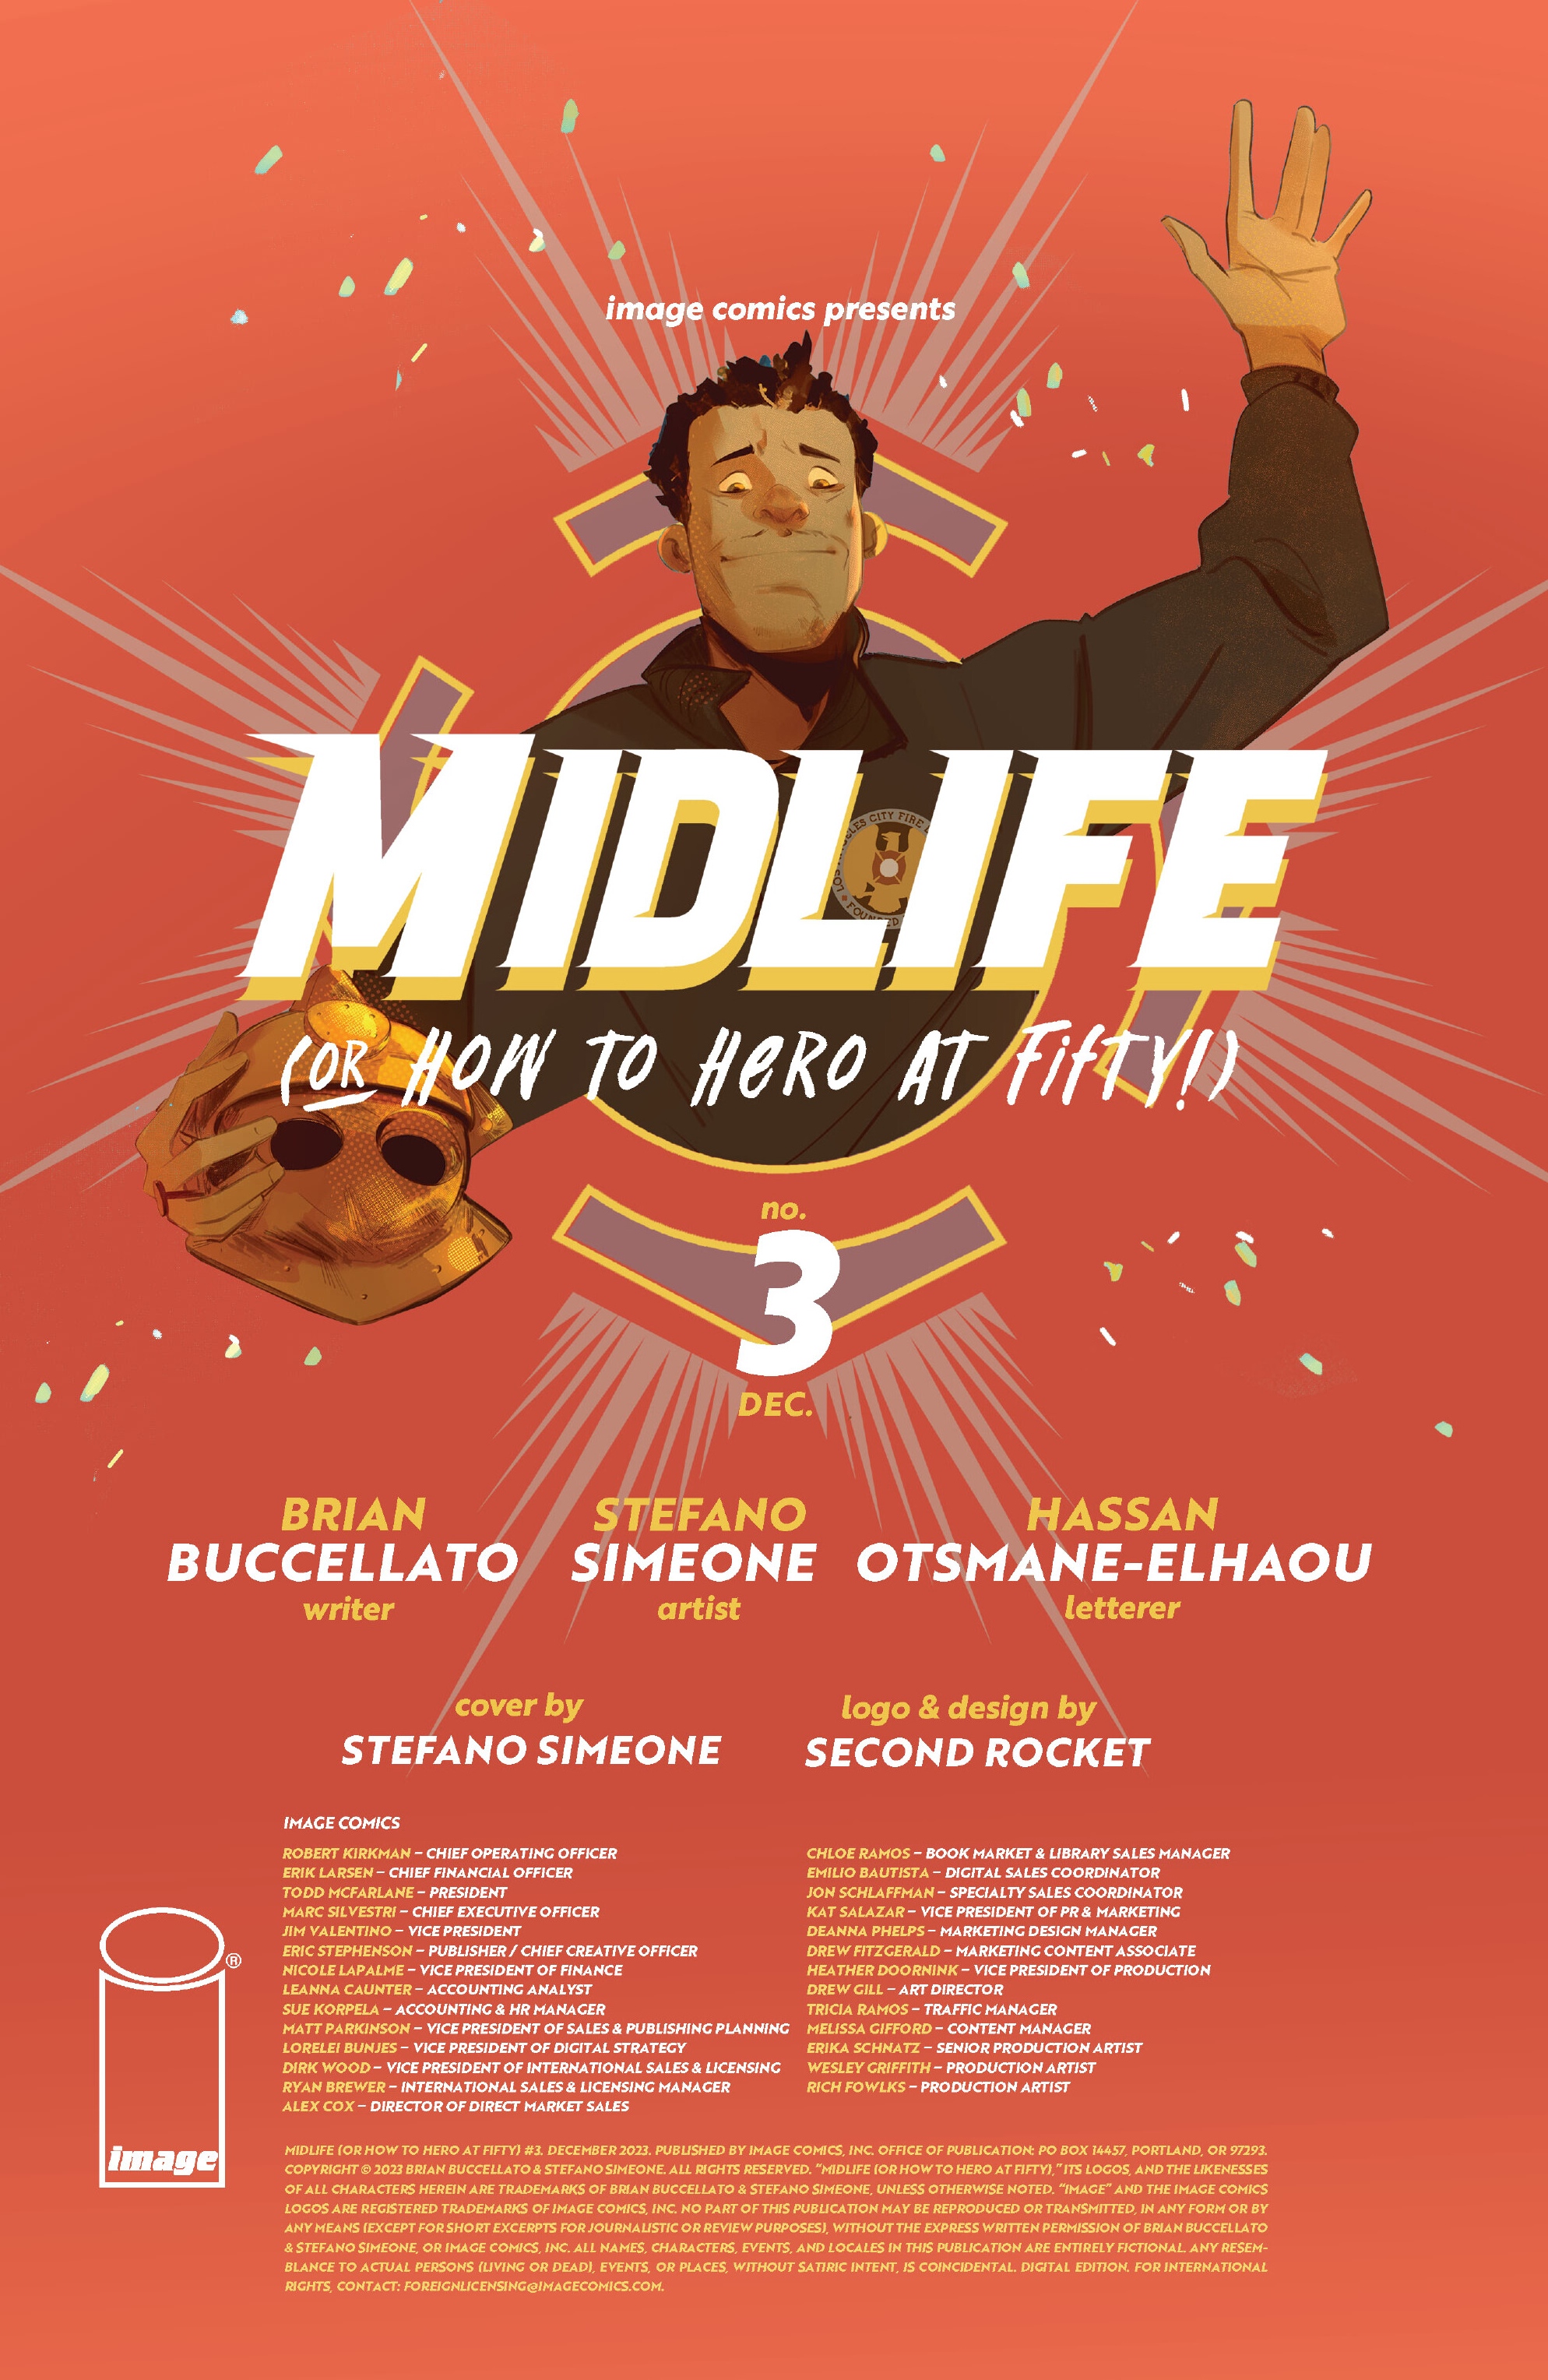 Read online Midlife (or How to Hero at Fifty!) comic -  Issue #3 - 2